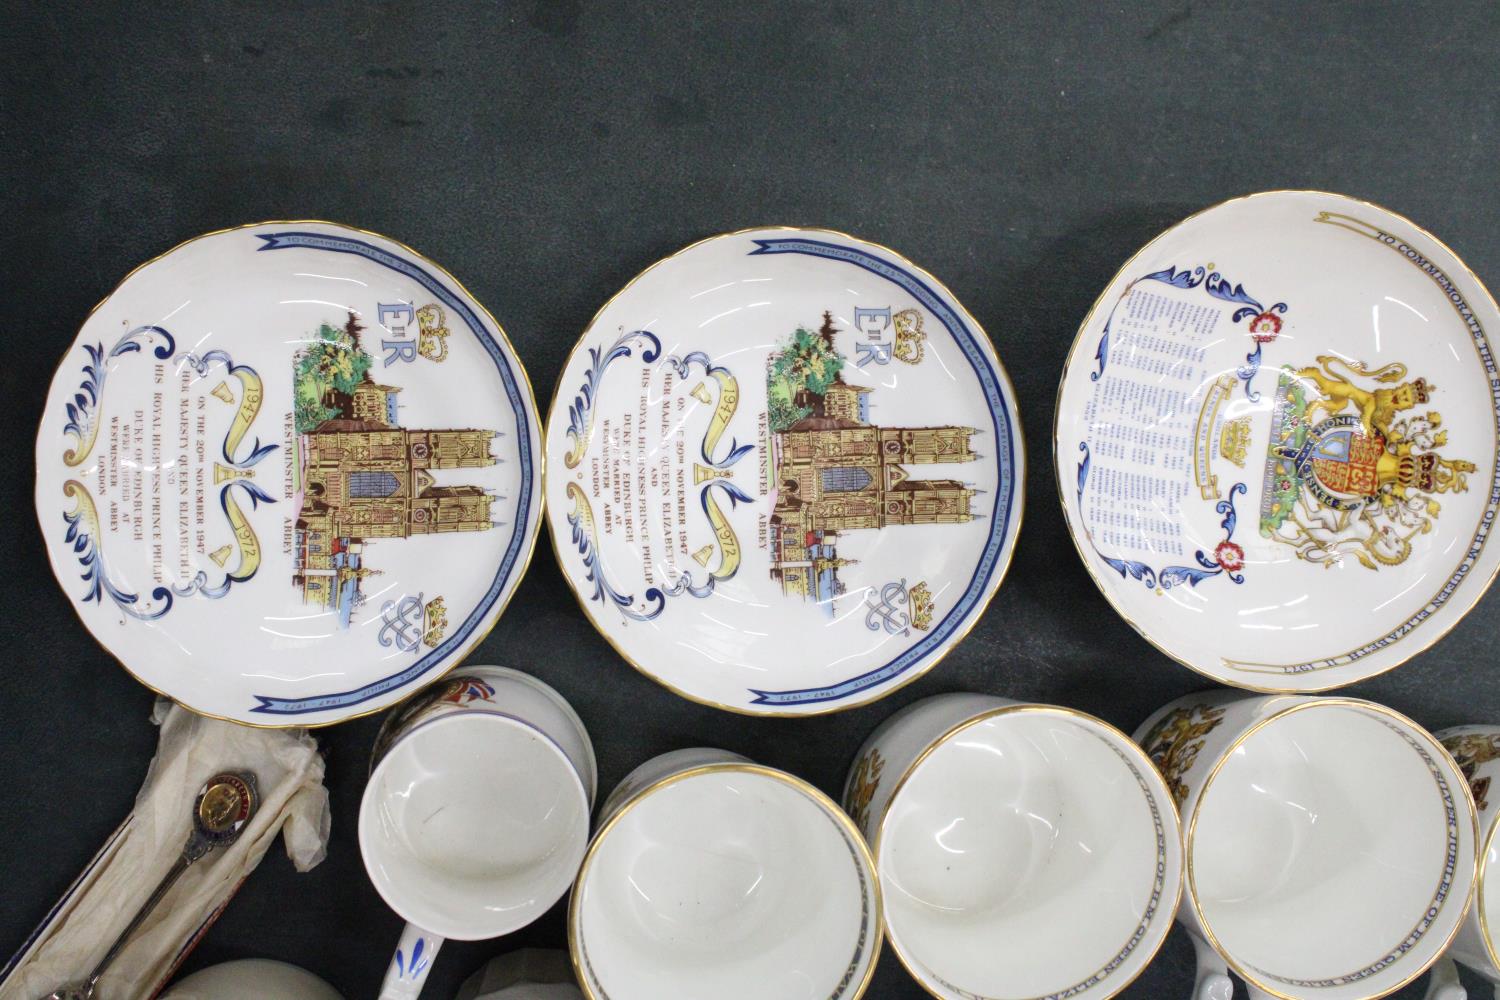 A COLLECTION OF COMMEMORATIVE WARE TO INCLUDE SPODE, AYNSLEY, MUGS ETC PLUS A BOM-BOM DISH WITH A - Image 4 of 7